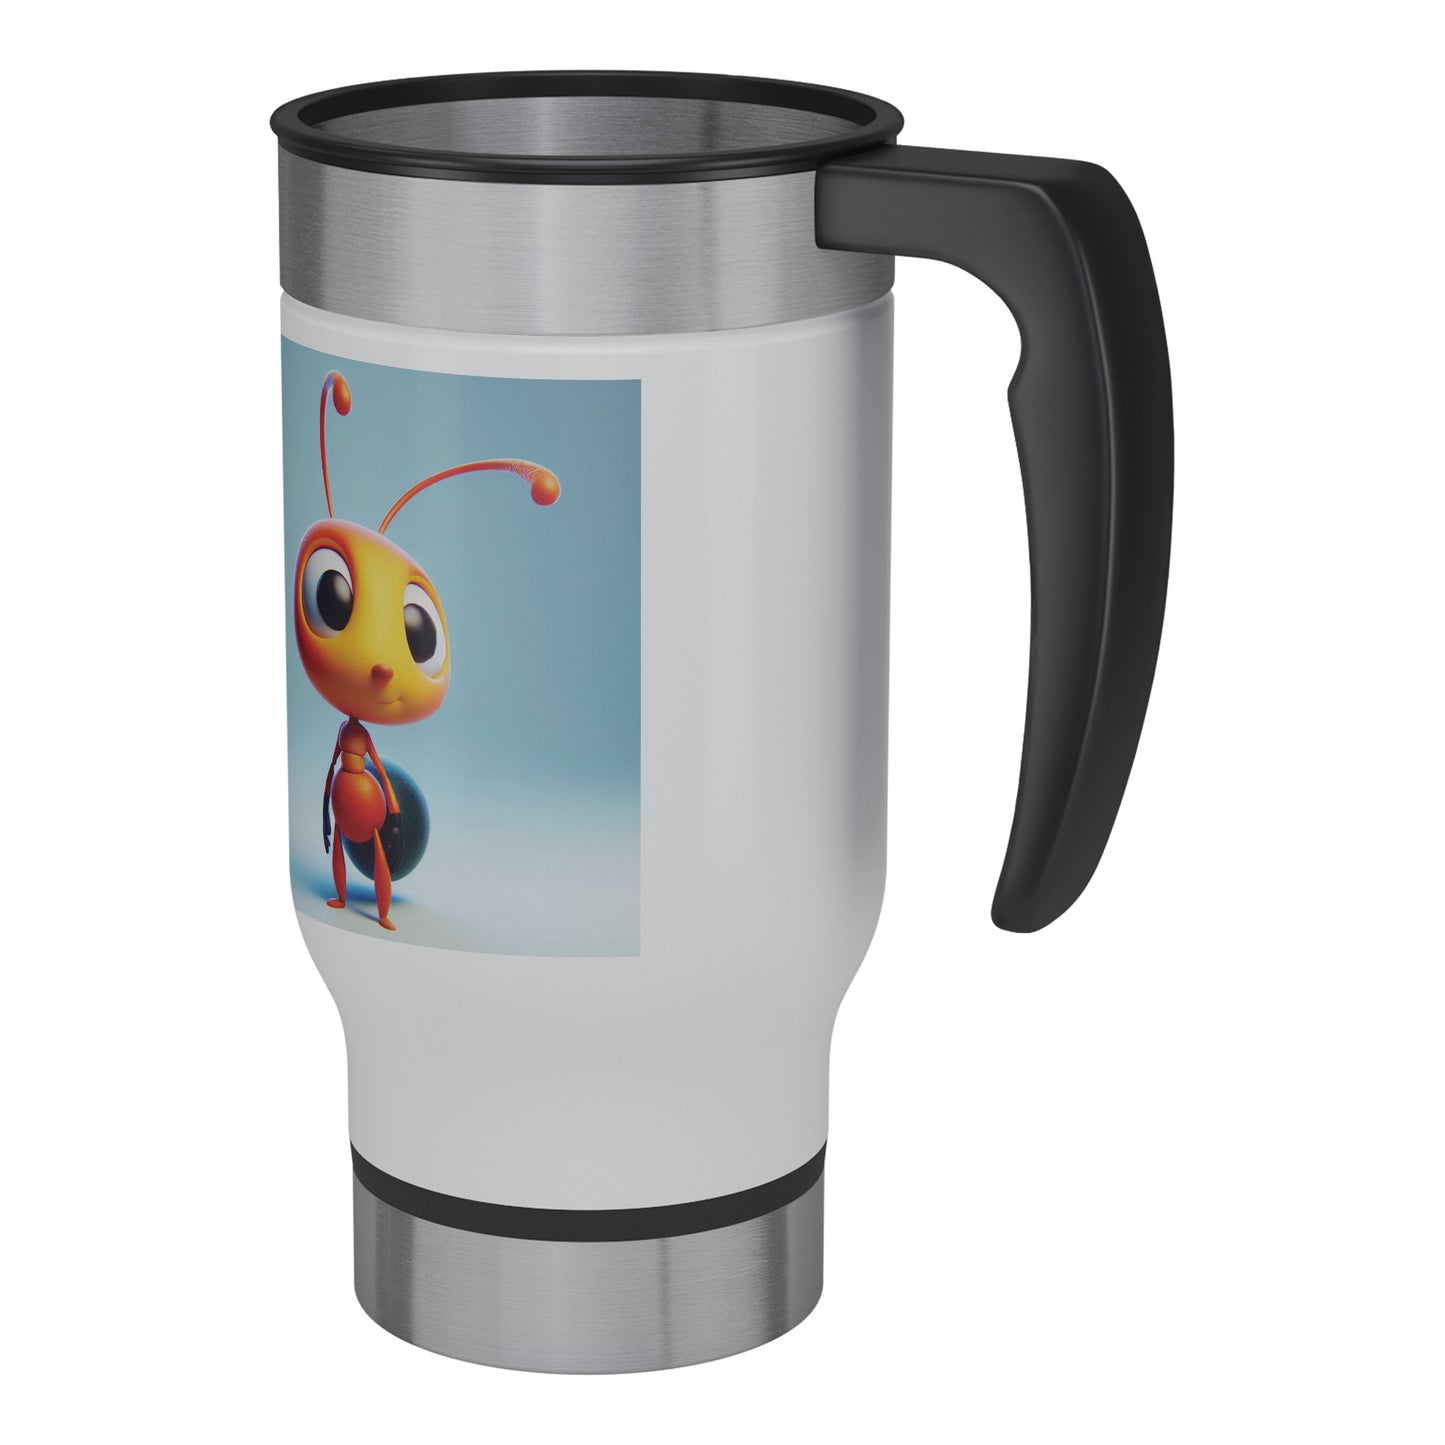 Cute & Adorable Insects - 14oz Travel Mug - Ants #1